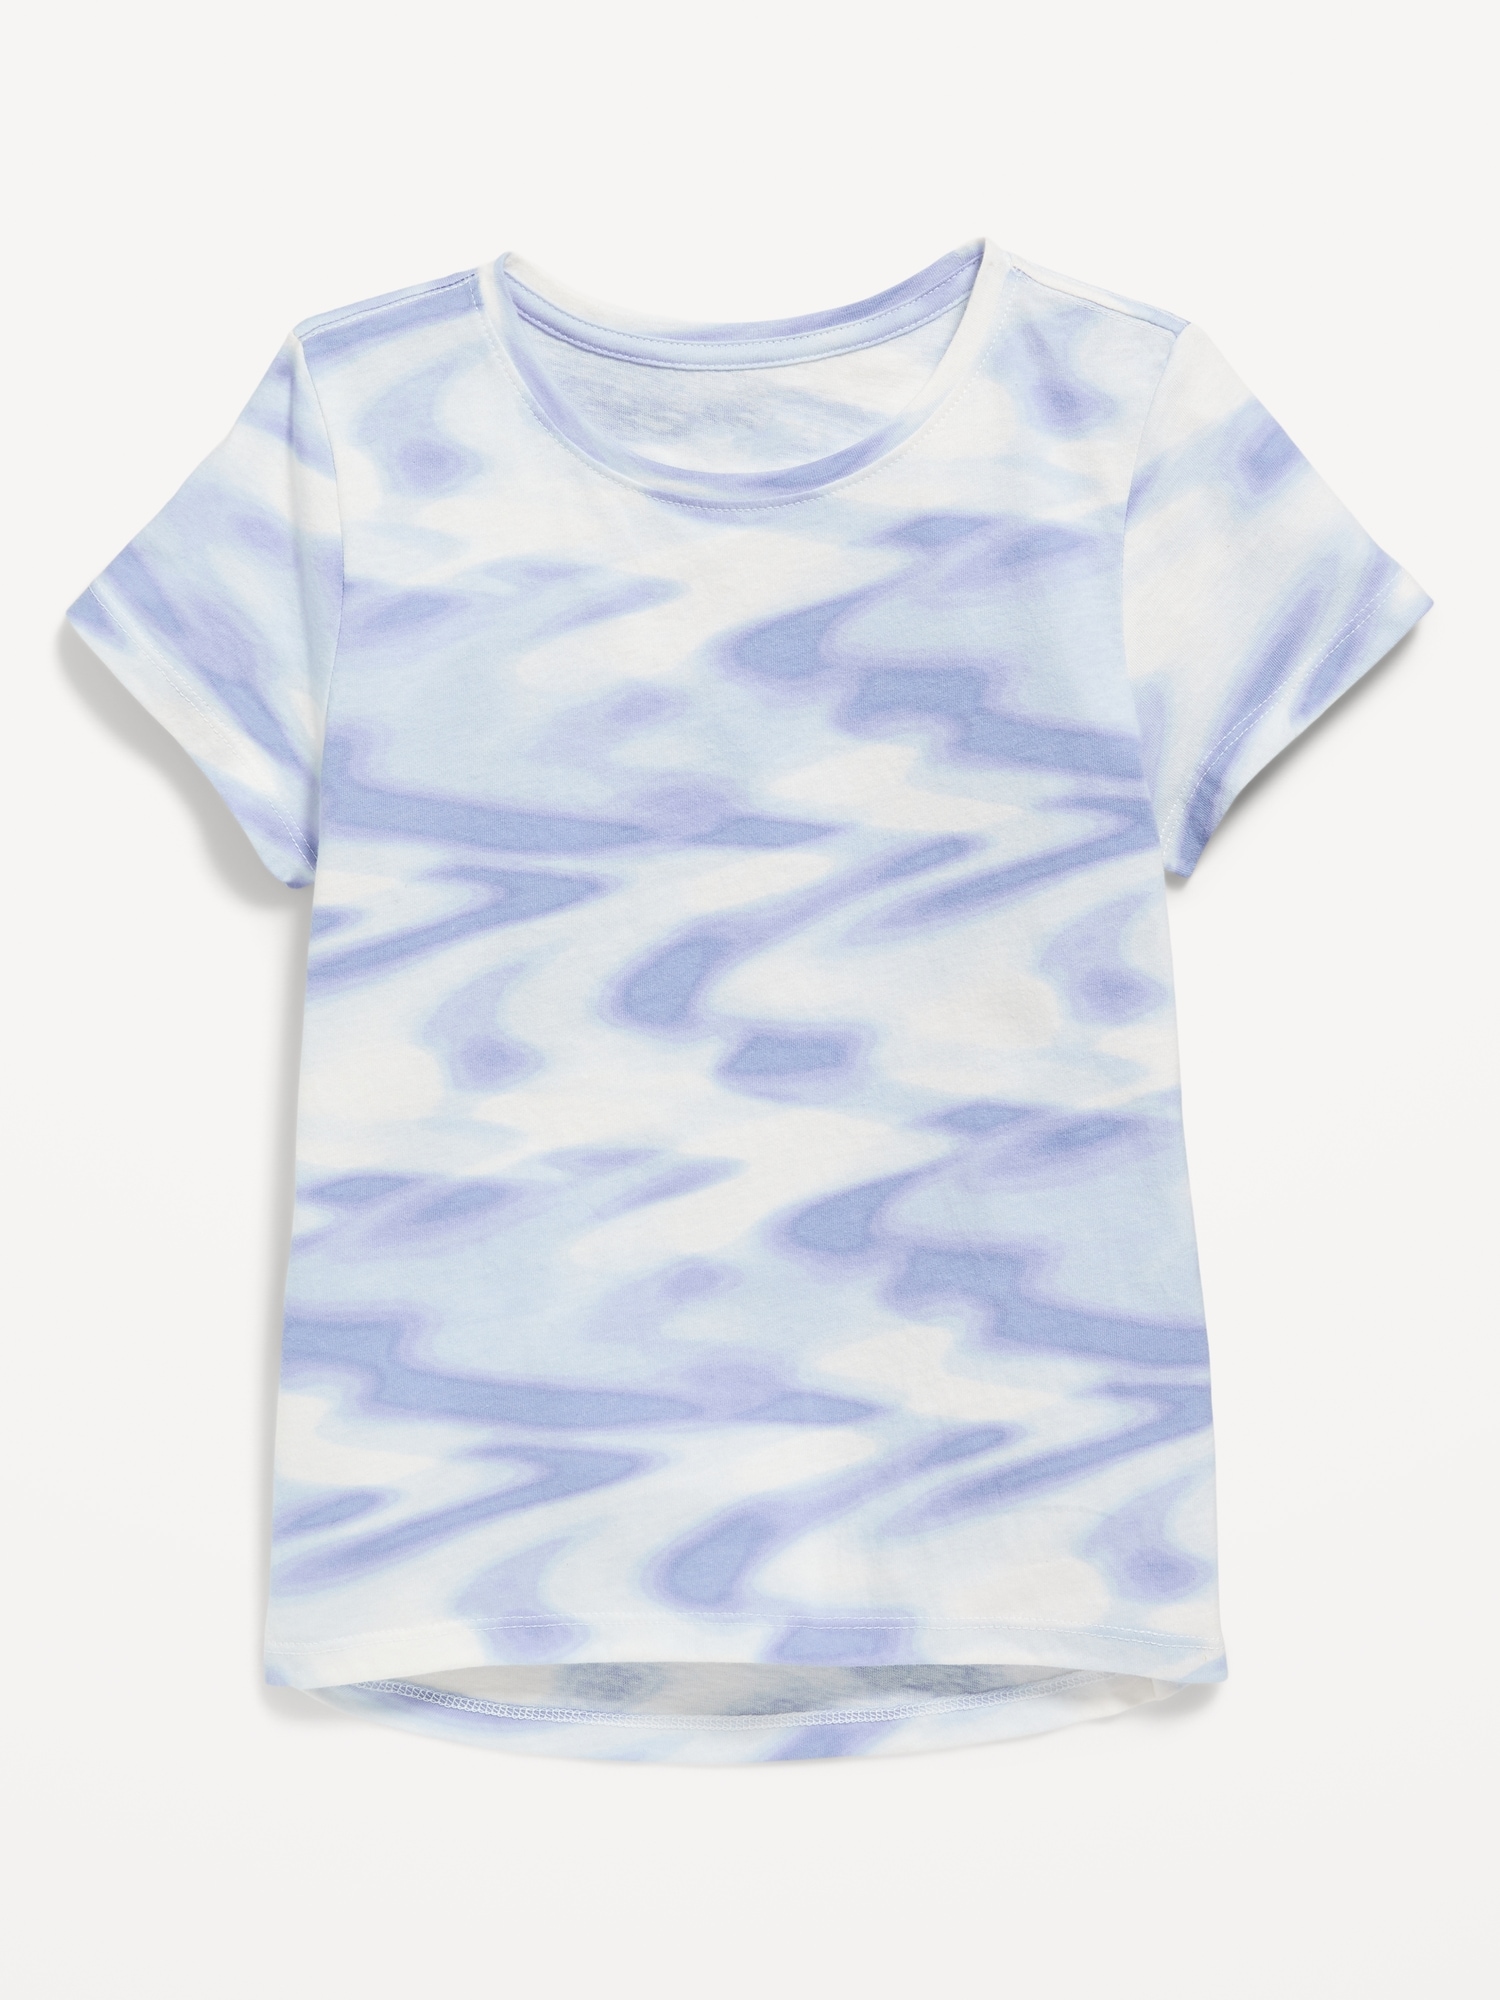 Old Navy Softest Short-Sleeve Printed T-Shirt for Girls blue. 1